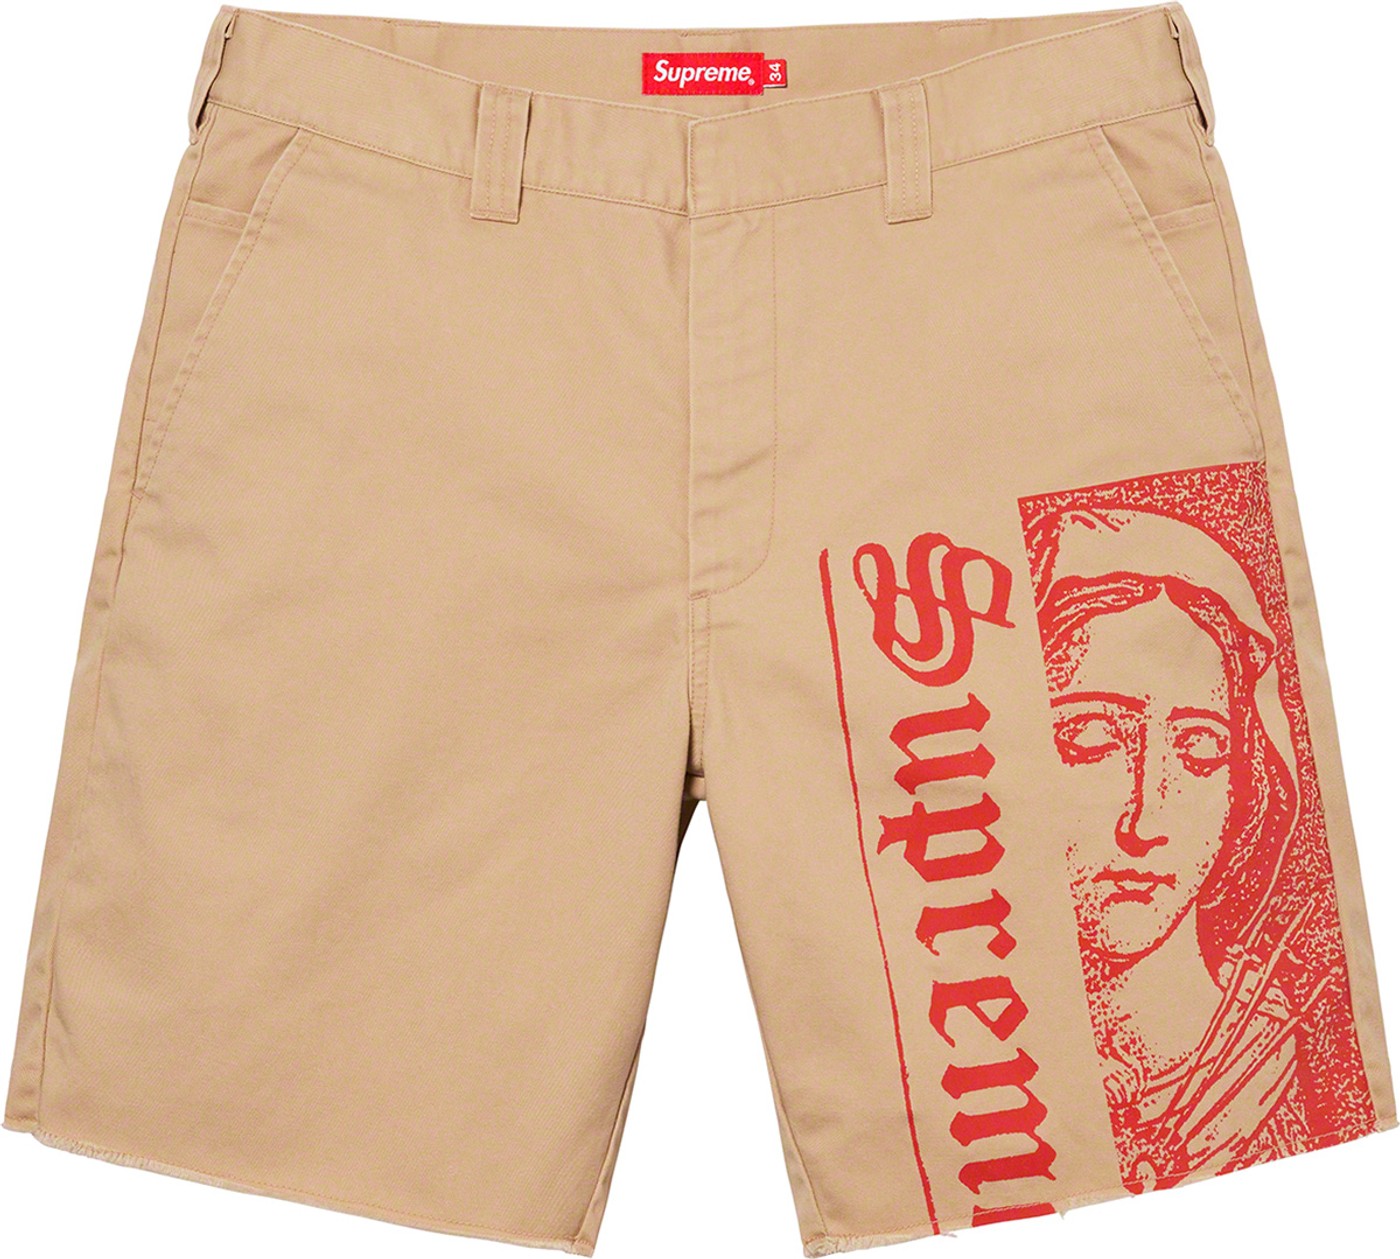 Mesh Panel Water Short - Spring/Summer 2020 Preview – Supreme